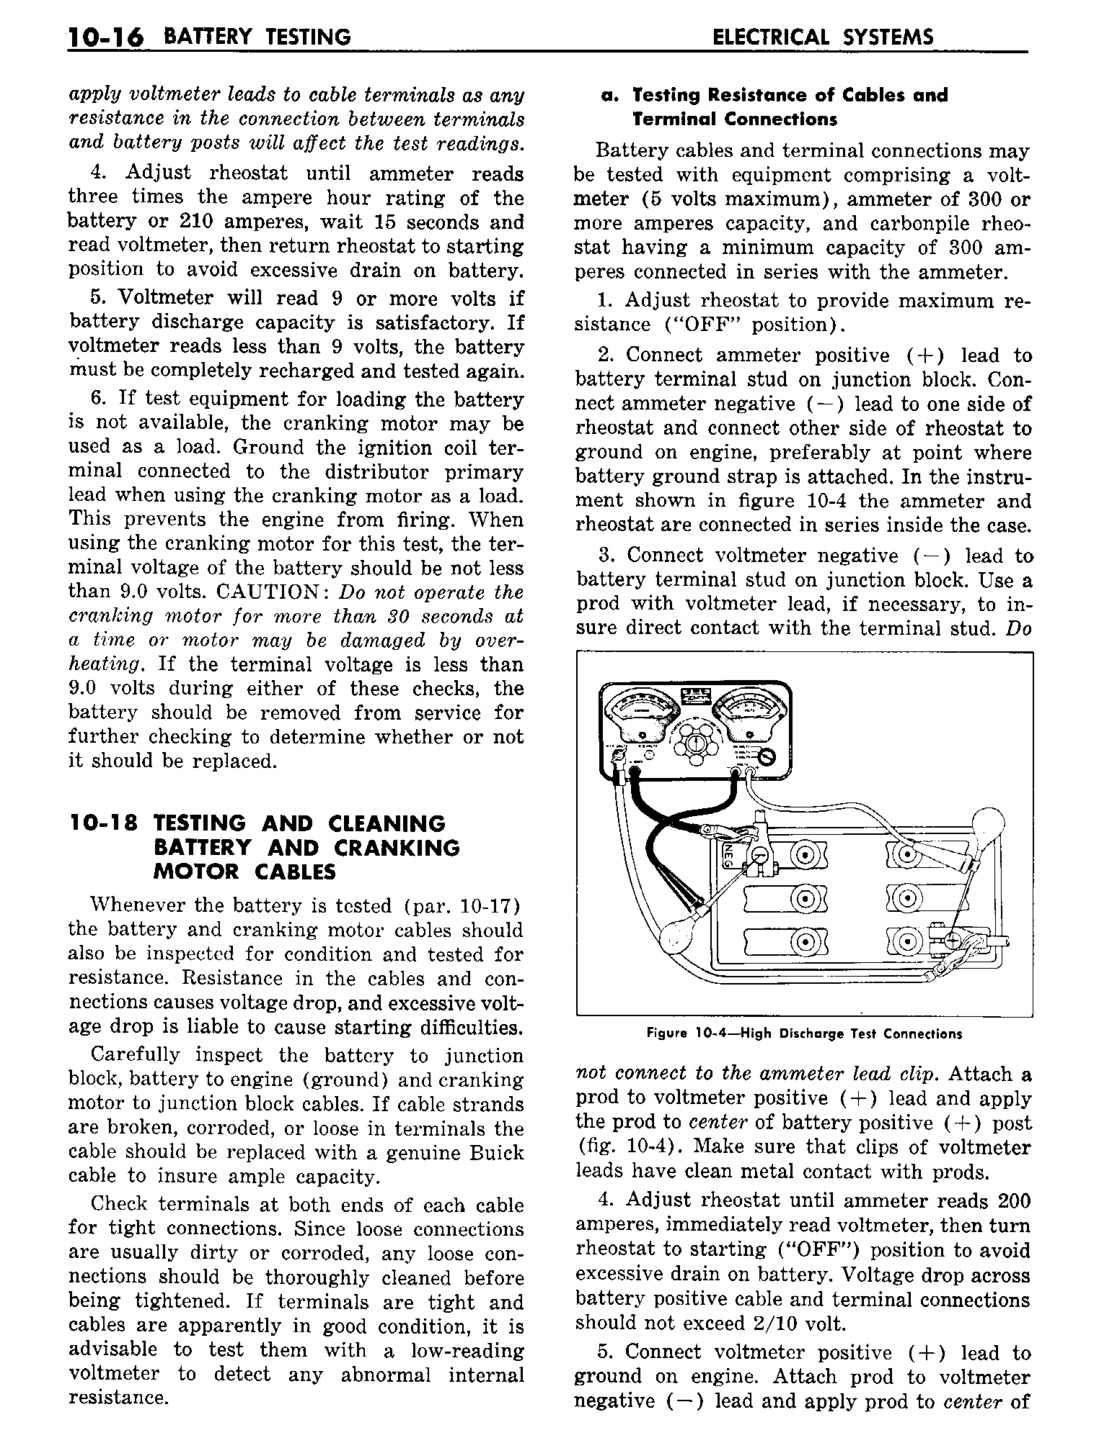 n_11 1960 Buick Shop Manual - Electrical Systems-016-016.jpg